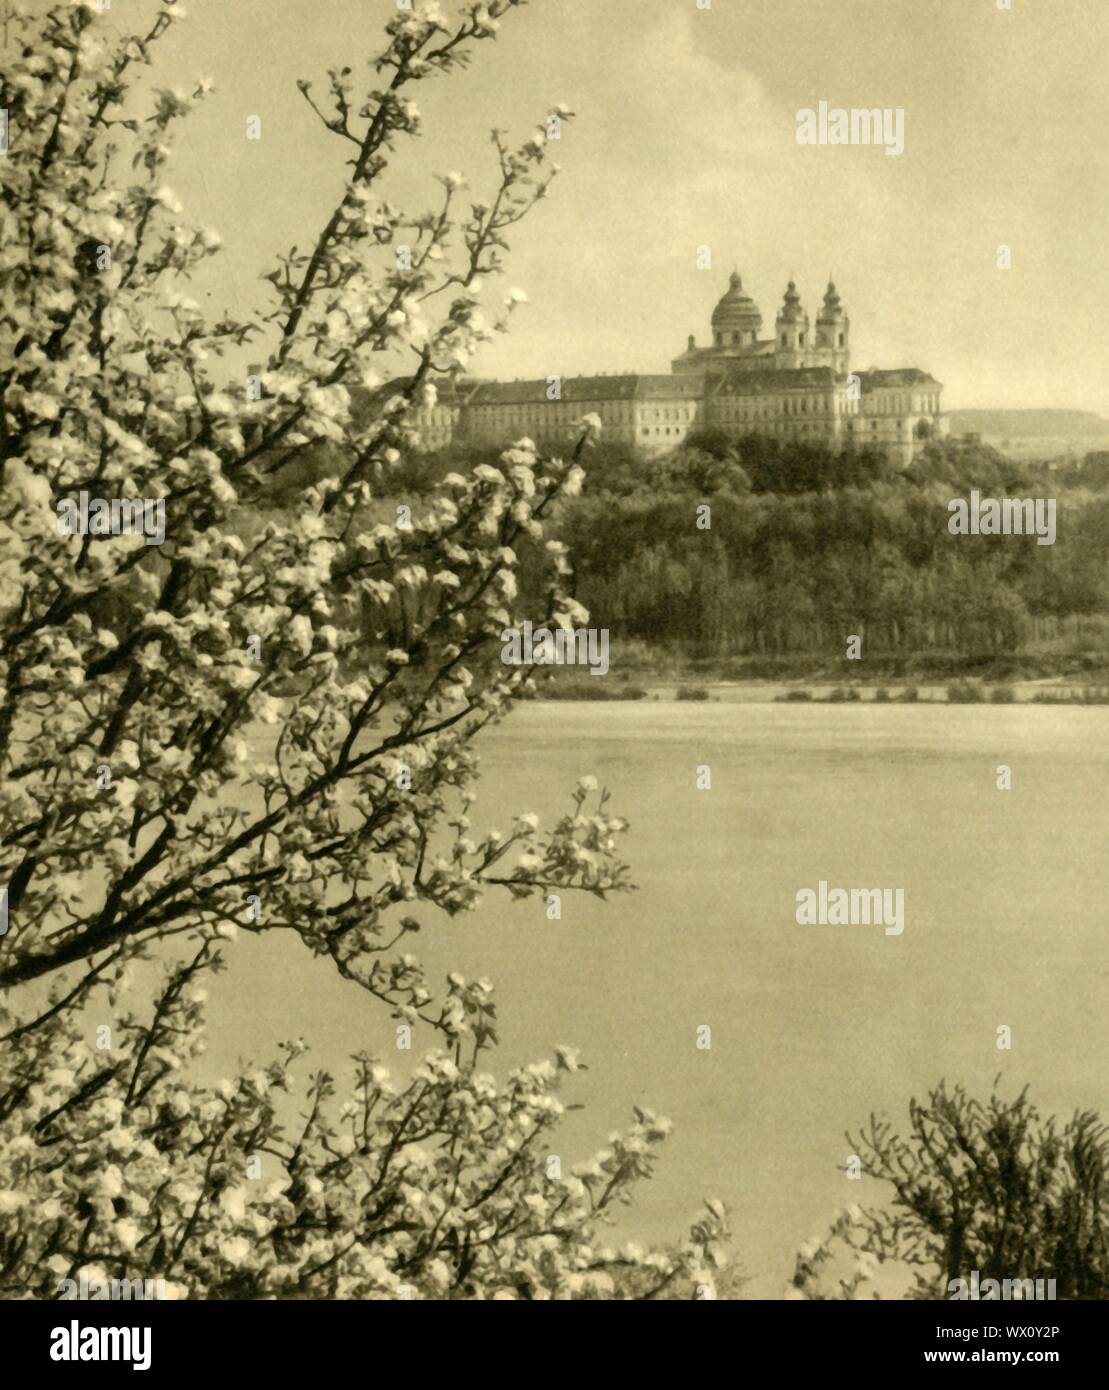 Melk Abbey, Lower Austria, c1935. Benedictine abbey above the town of Melk, overlooking the River Danube. From &quot;&#xd6;sterreich - Land Und Volk&quot;, (Austria, Land and People). [R. Lechner (Wilhelm M&#xfc;ller), Vienna, c1935] Stock Photo